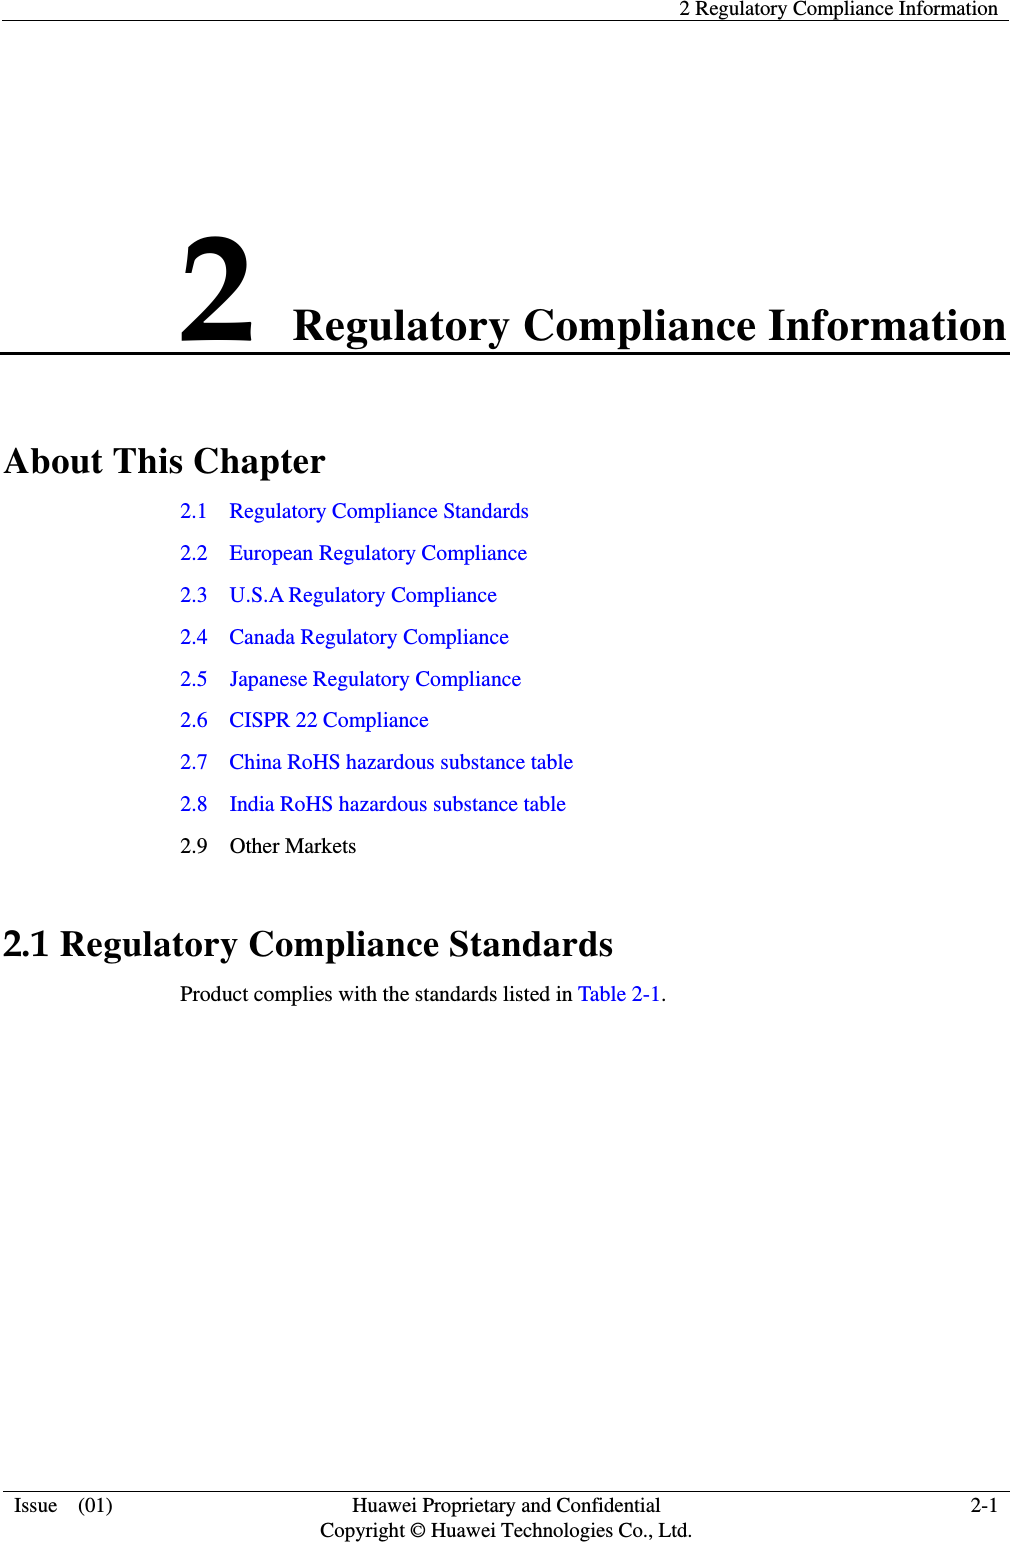   2 Regulatory Compliance Information  Issue    (01) Huawei Proprietary and Confidential                                     Copyright © Huawei Technologies Co., Ltd. 2-1  2 Regulatory Compliance Information About This Chapter 2.1    Regulatory Compliance Standards 2.2    European Regulatory Compliance 2.3    U.S.A Regulatory Compliance                                                                                     2.4    Canada Regulatory Compliance 2.5  Japanese Regulatory Compliance 2.6  CISPR 22 Compliance   2.7  China RoHS hazardous substance table 2.8  India RoHS hazardous substance table 2.9  Other Markets 2.1 Regulatory Compliance Standards Product complies with the standards listed in Table 2-1. 